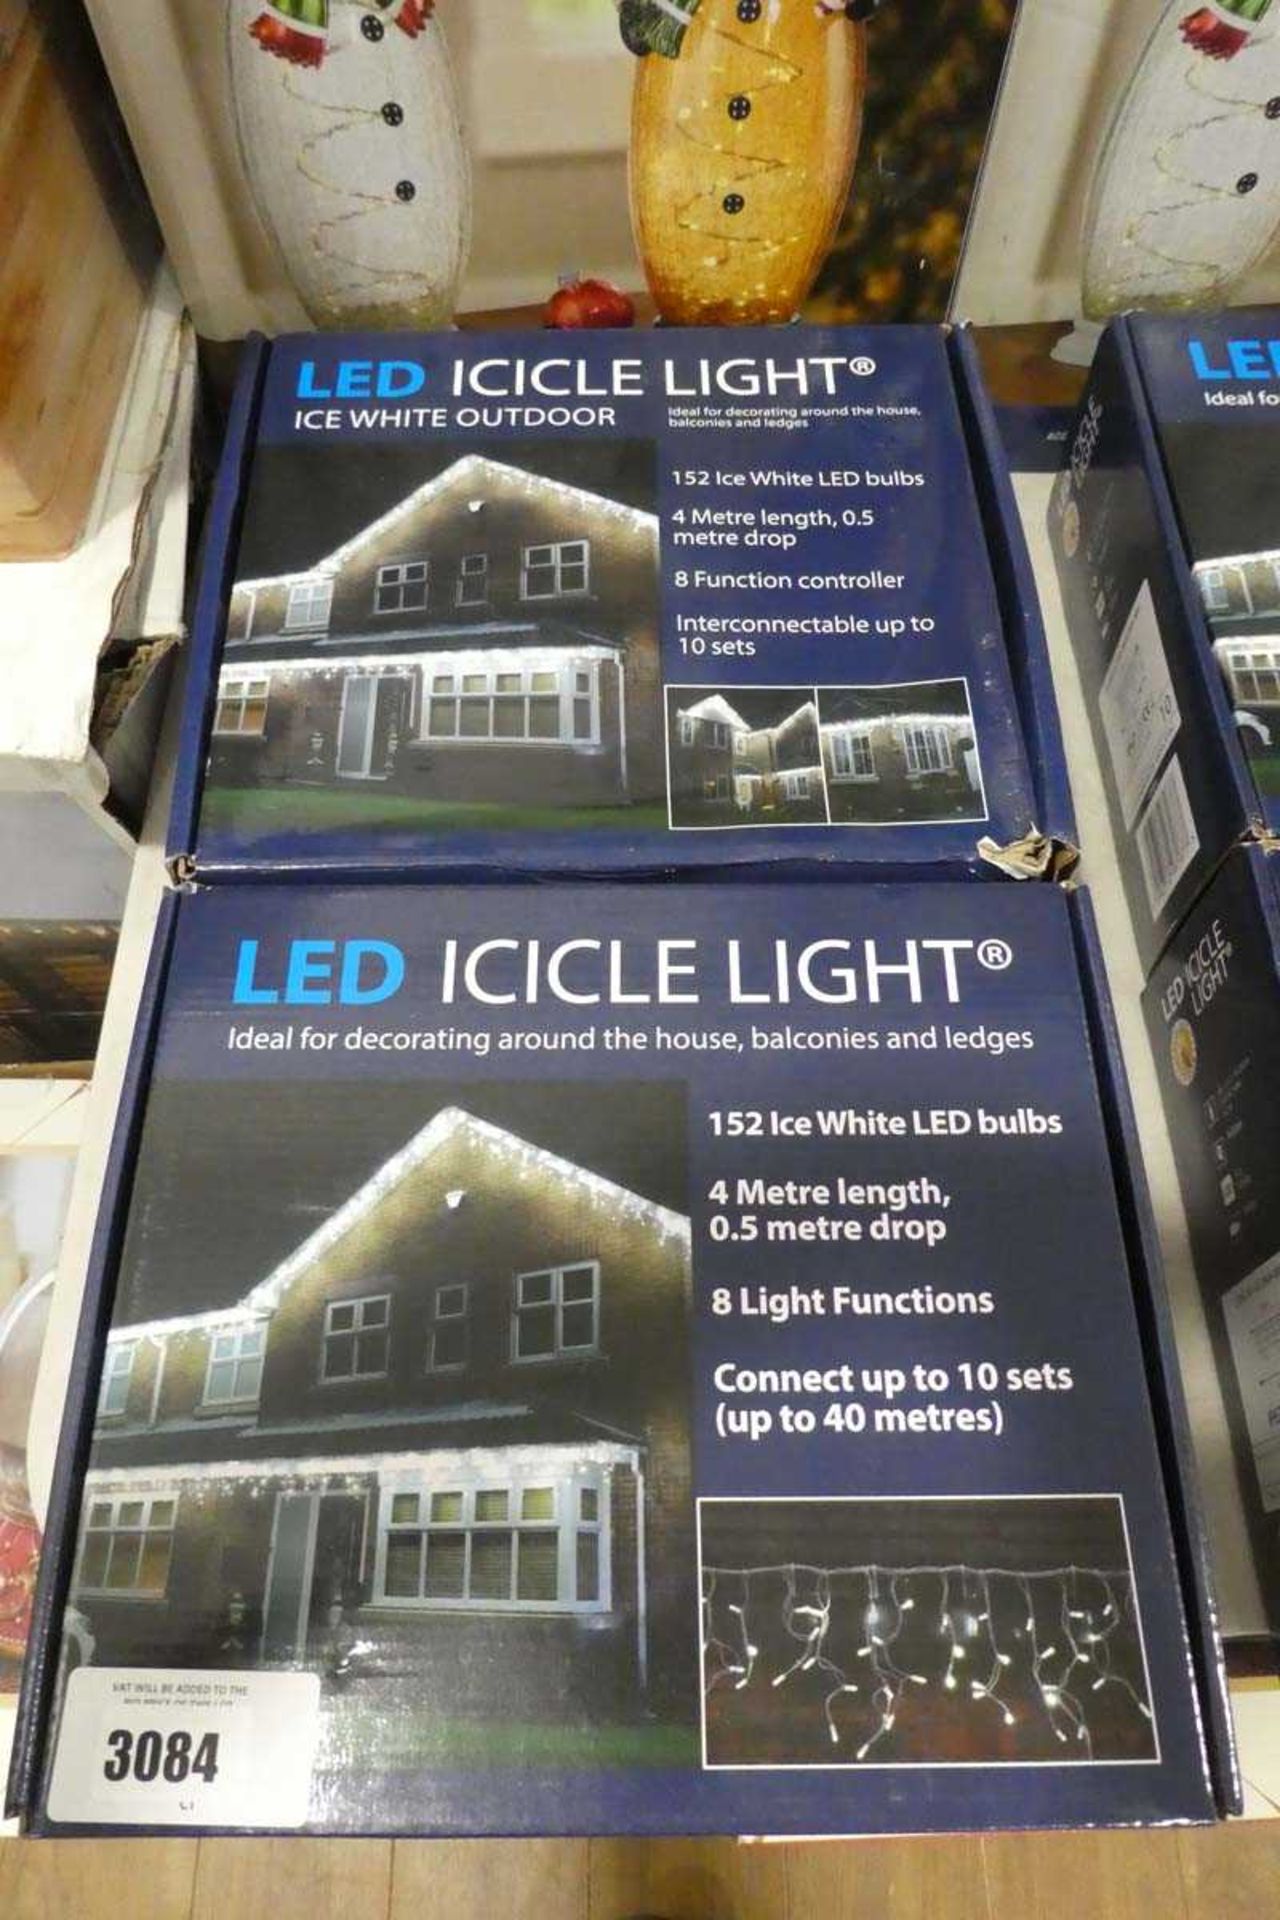 +VAT 2 boxed sets of LED icicle lightss (icee white, 4m length, 0.5m drop, 8 light functions)